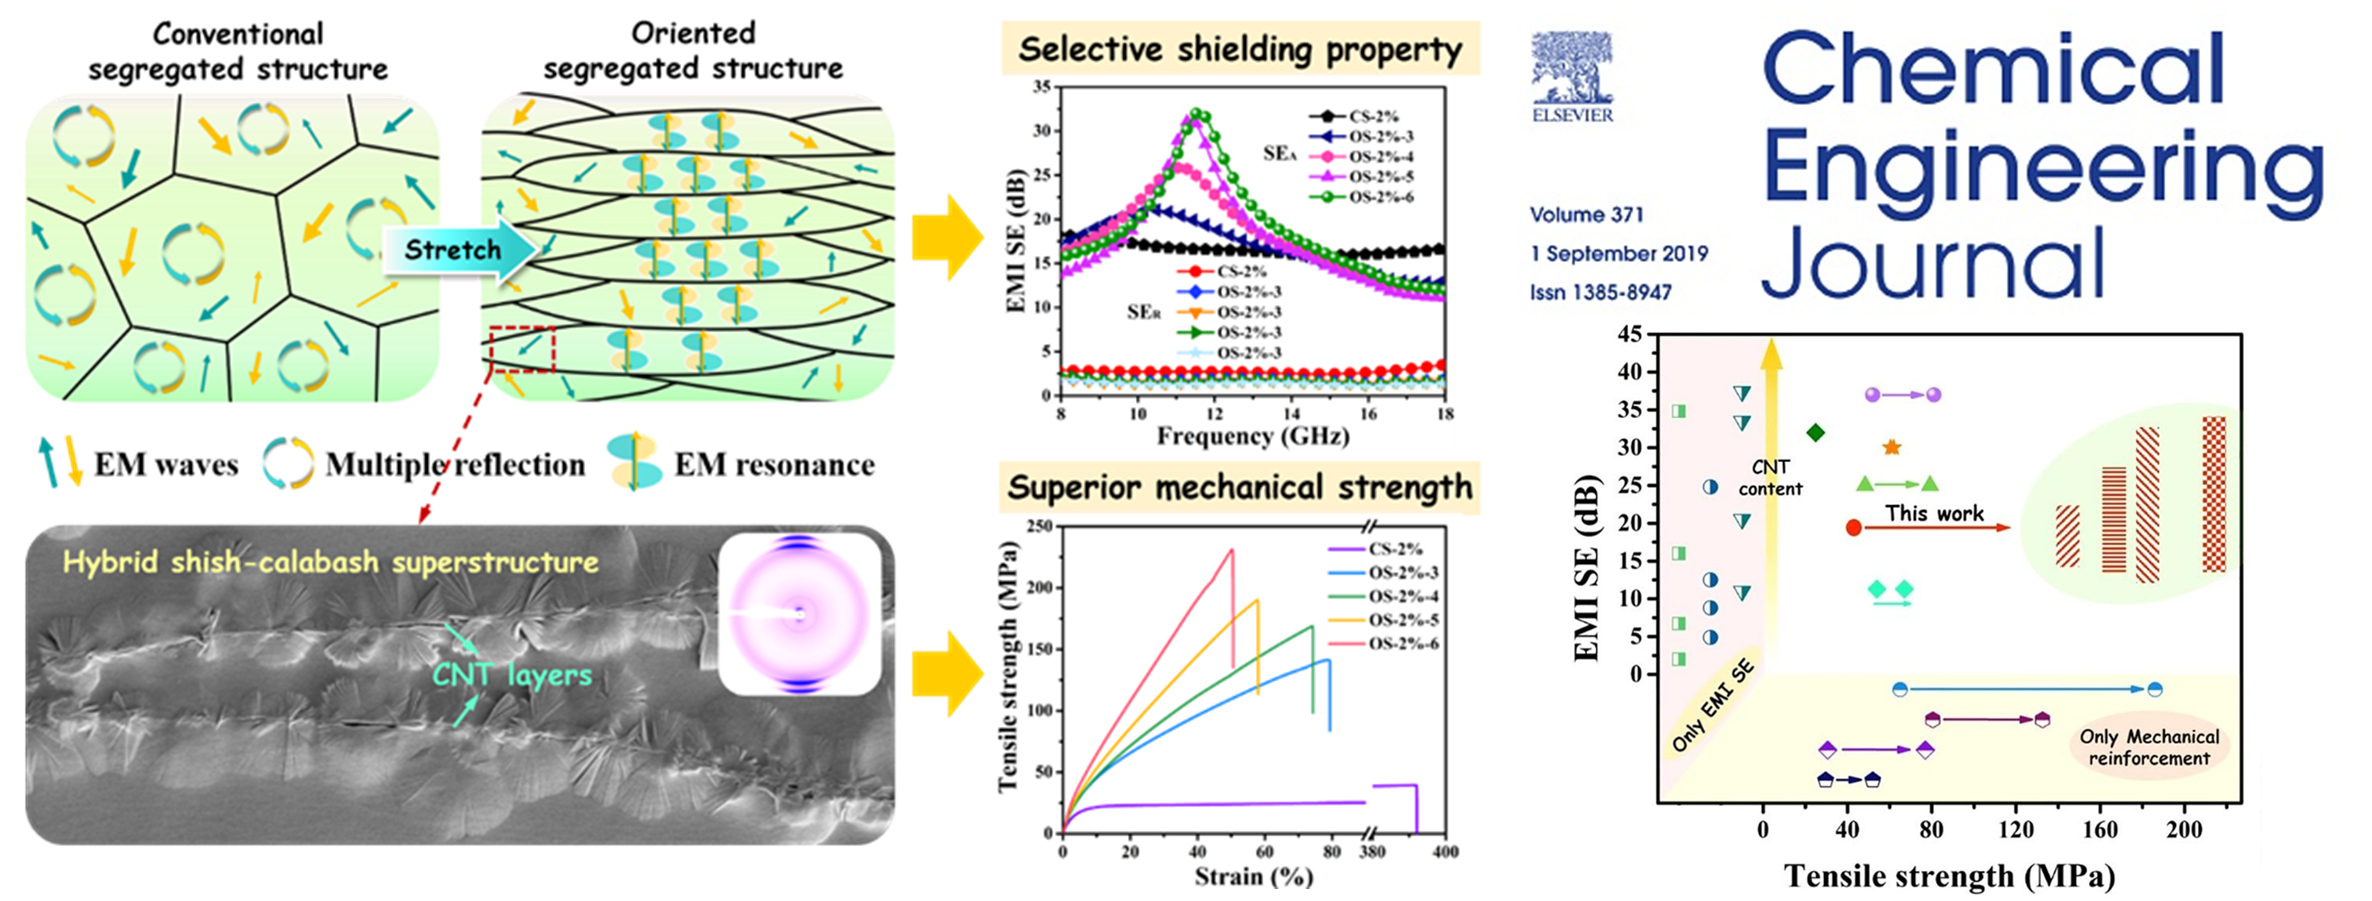 Selective electromagnetic interference shielding performance and superior mechanical strength of conductive polymer composites with oriented segregated conductive networks. 